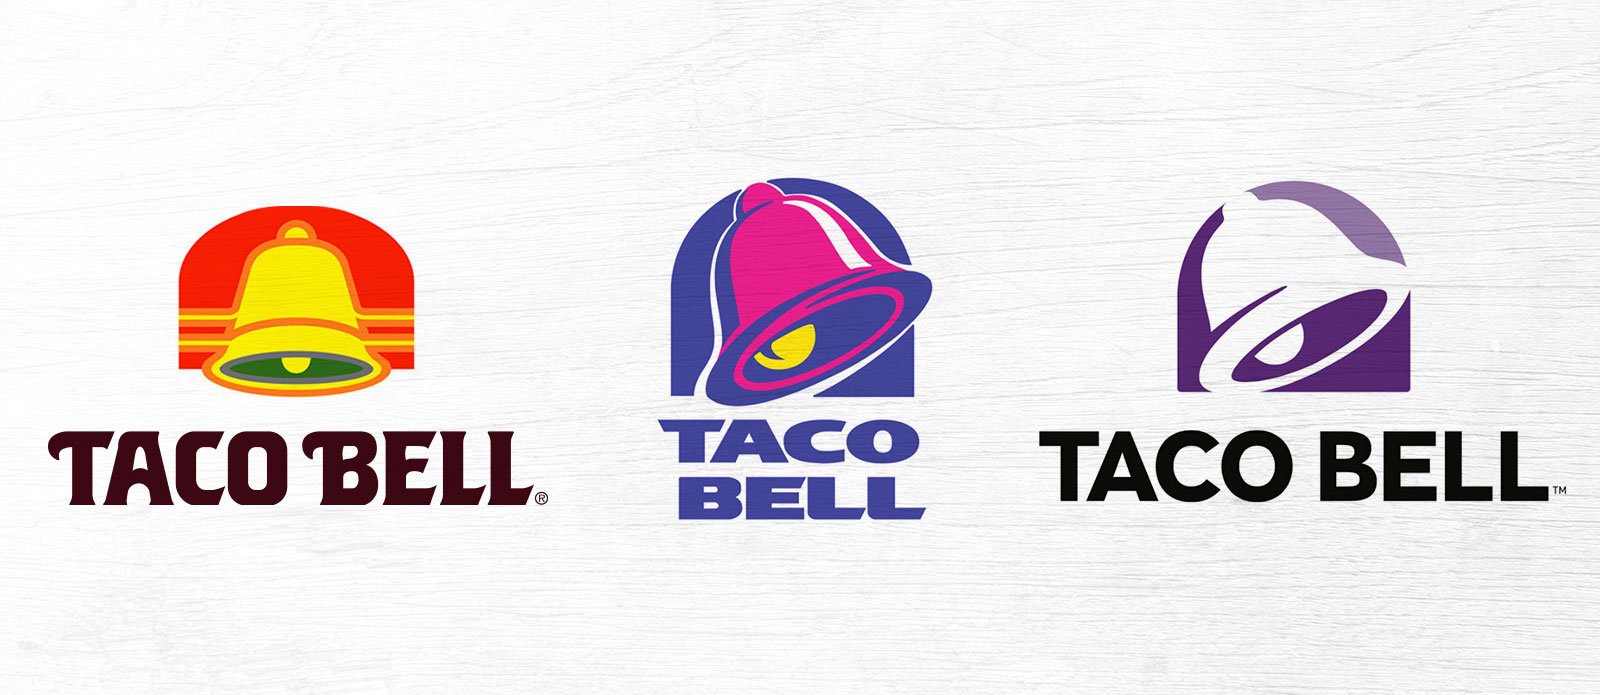 how big brands win taco bell s dominance is more than just a combination of beans meat and cheese how big brands win taco bell s dominance is more than just a combination of beans meat and cheese